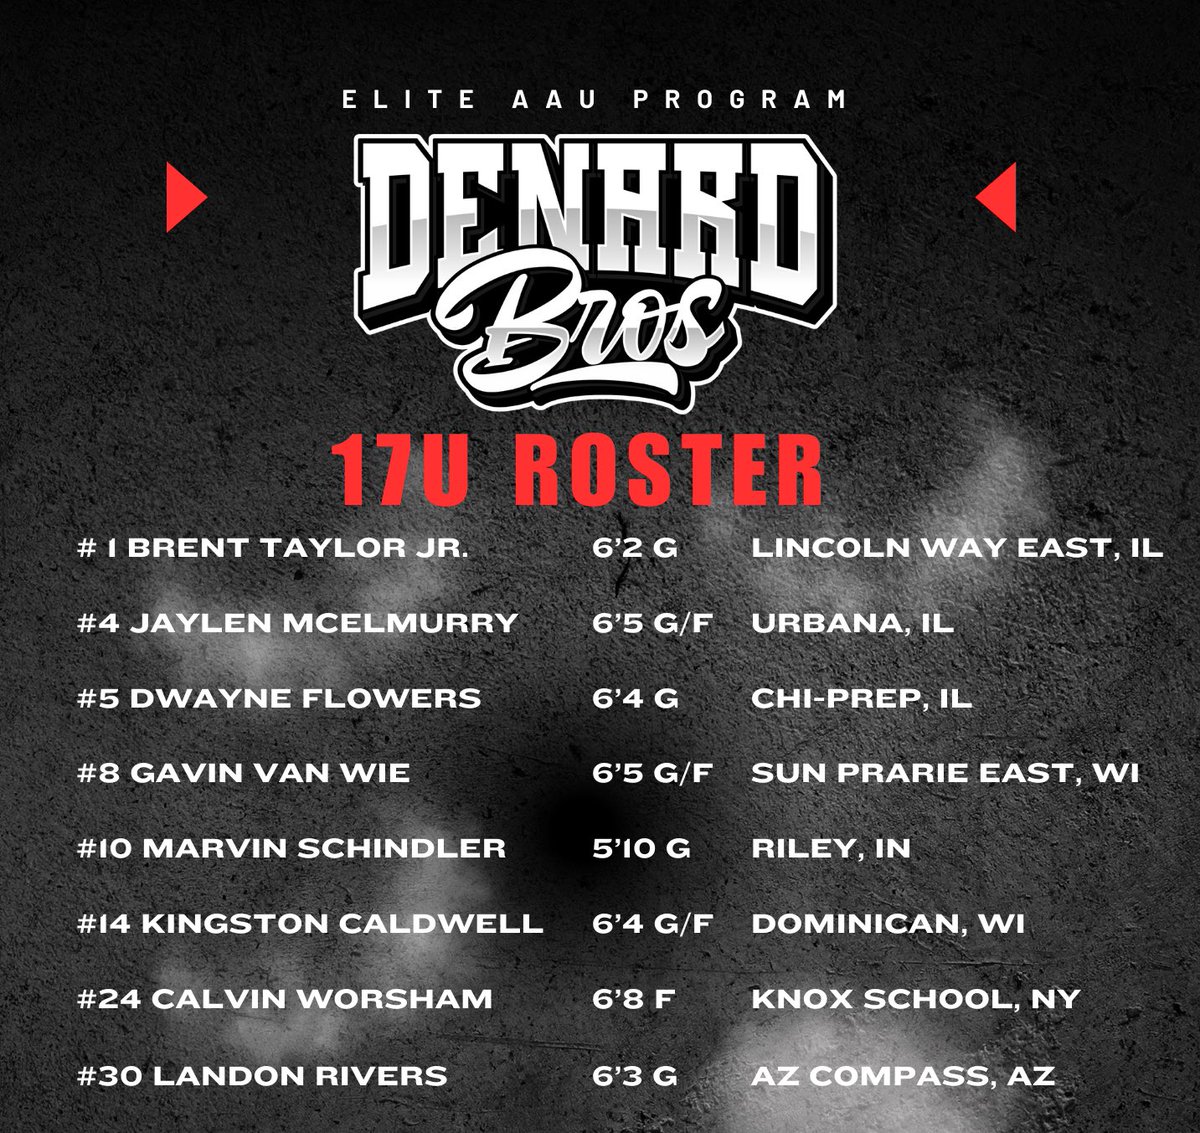 〽️The 17U DeNard Bros were outstanding this weekend at @HGSL_HoopGroup, going 4-1 with an impressive 17.4 ppg win margin! Huge shoutout to these athletes for their incredible perseverance teamwork and effort! Scholarship Prospects on this roster 🚨COLLEGE COACHES🚨 @brent_tayl0r